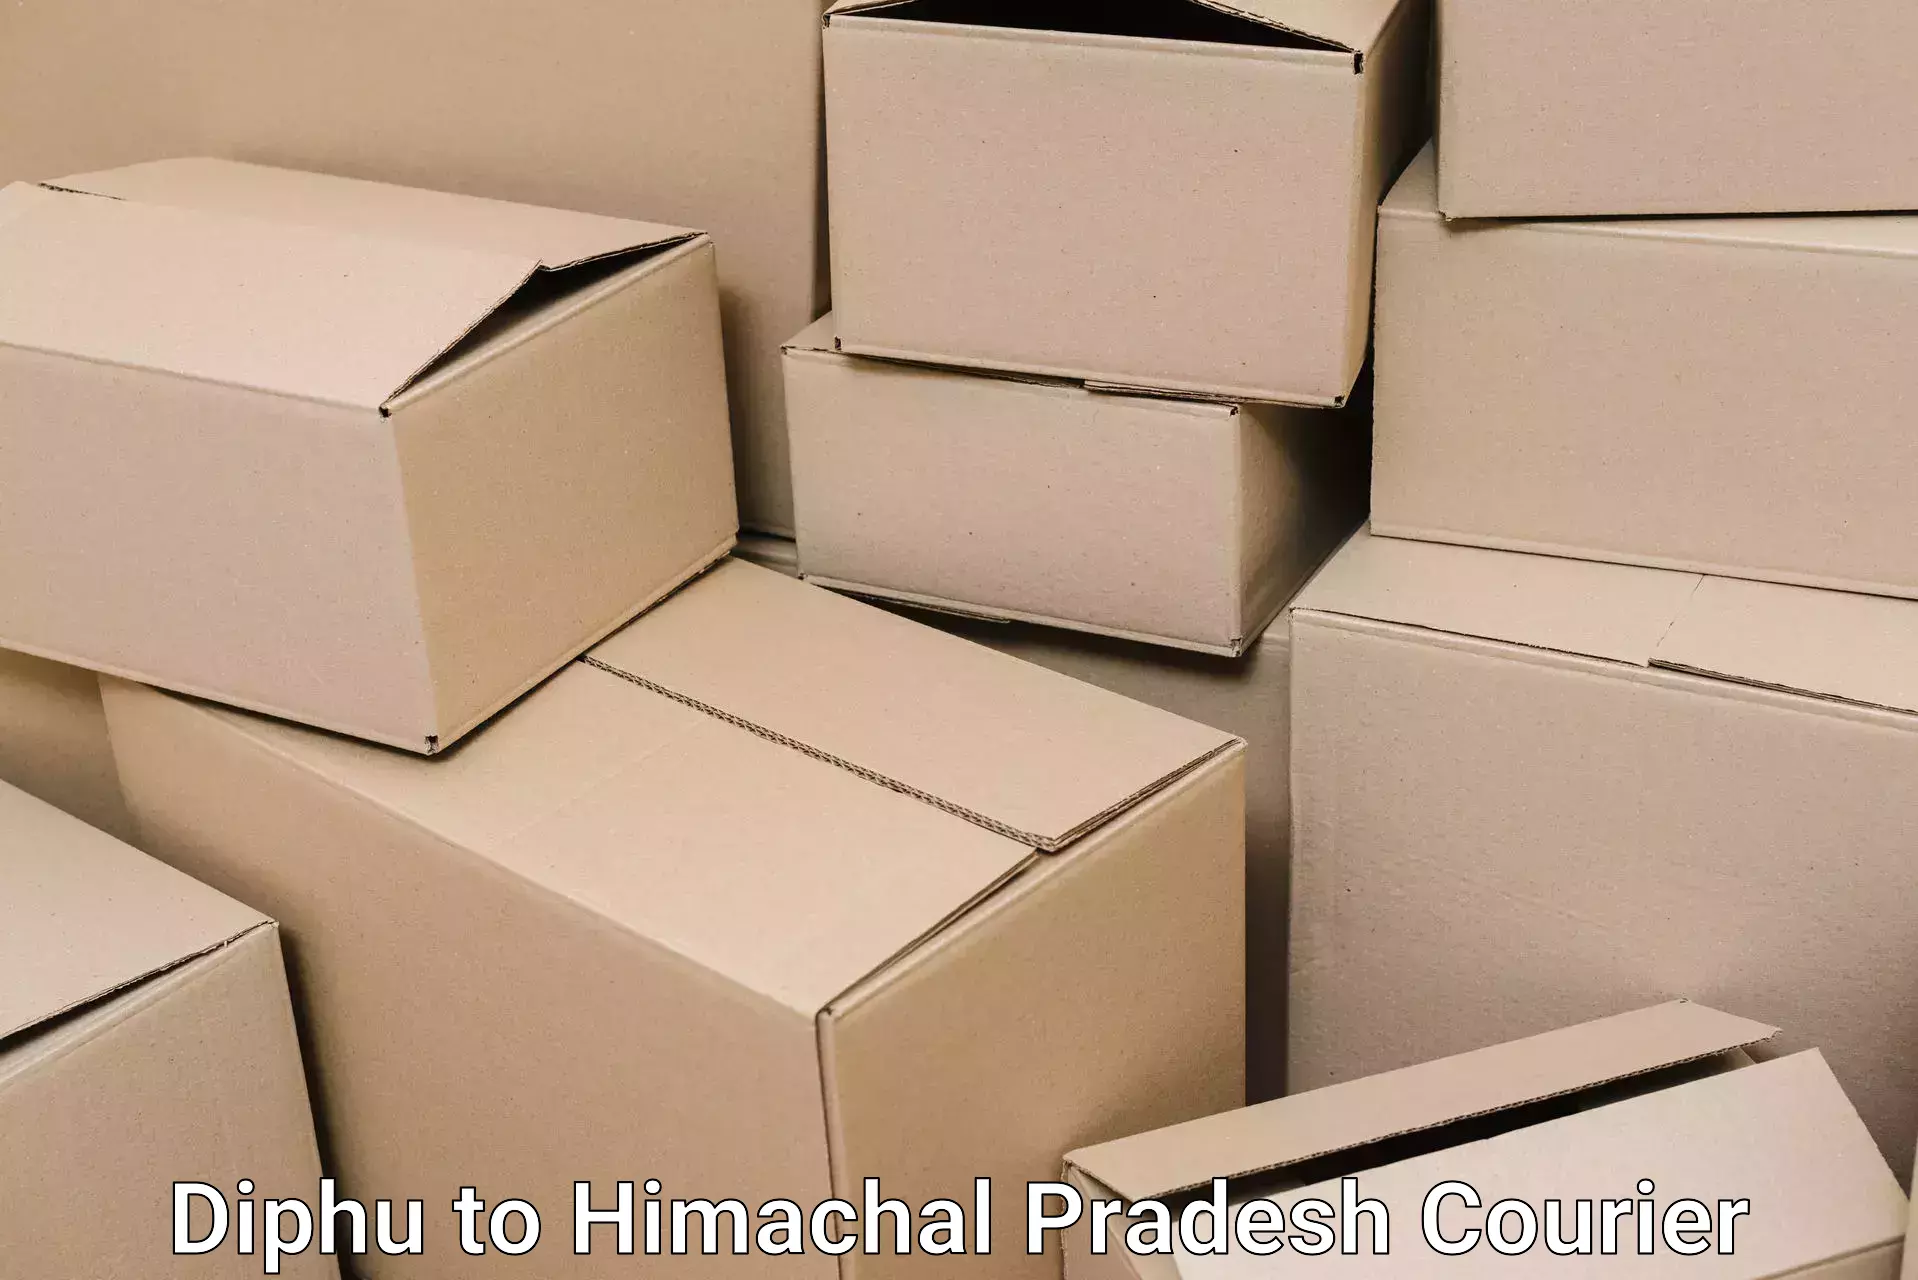 Furniture moving specialists Diphu to Himachal Pradesh